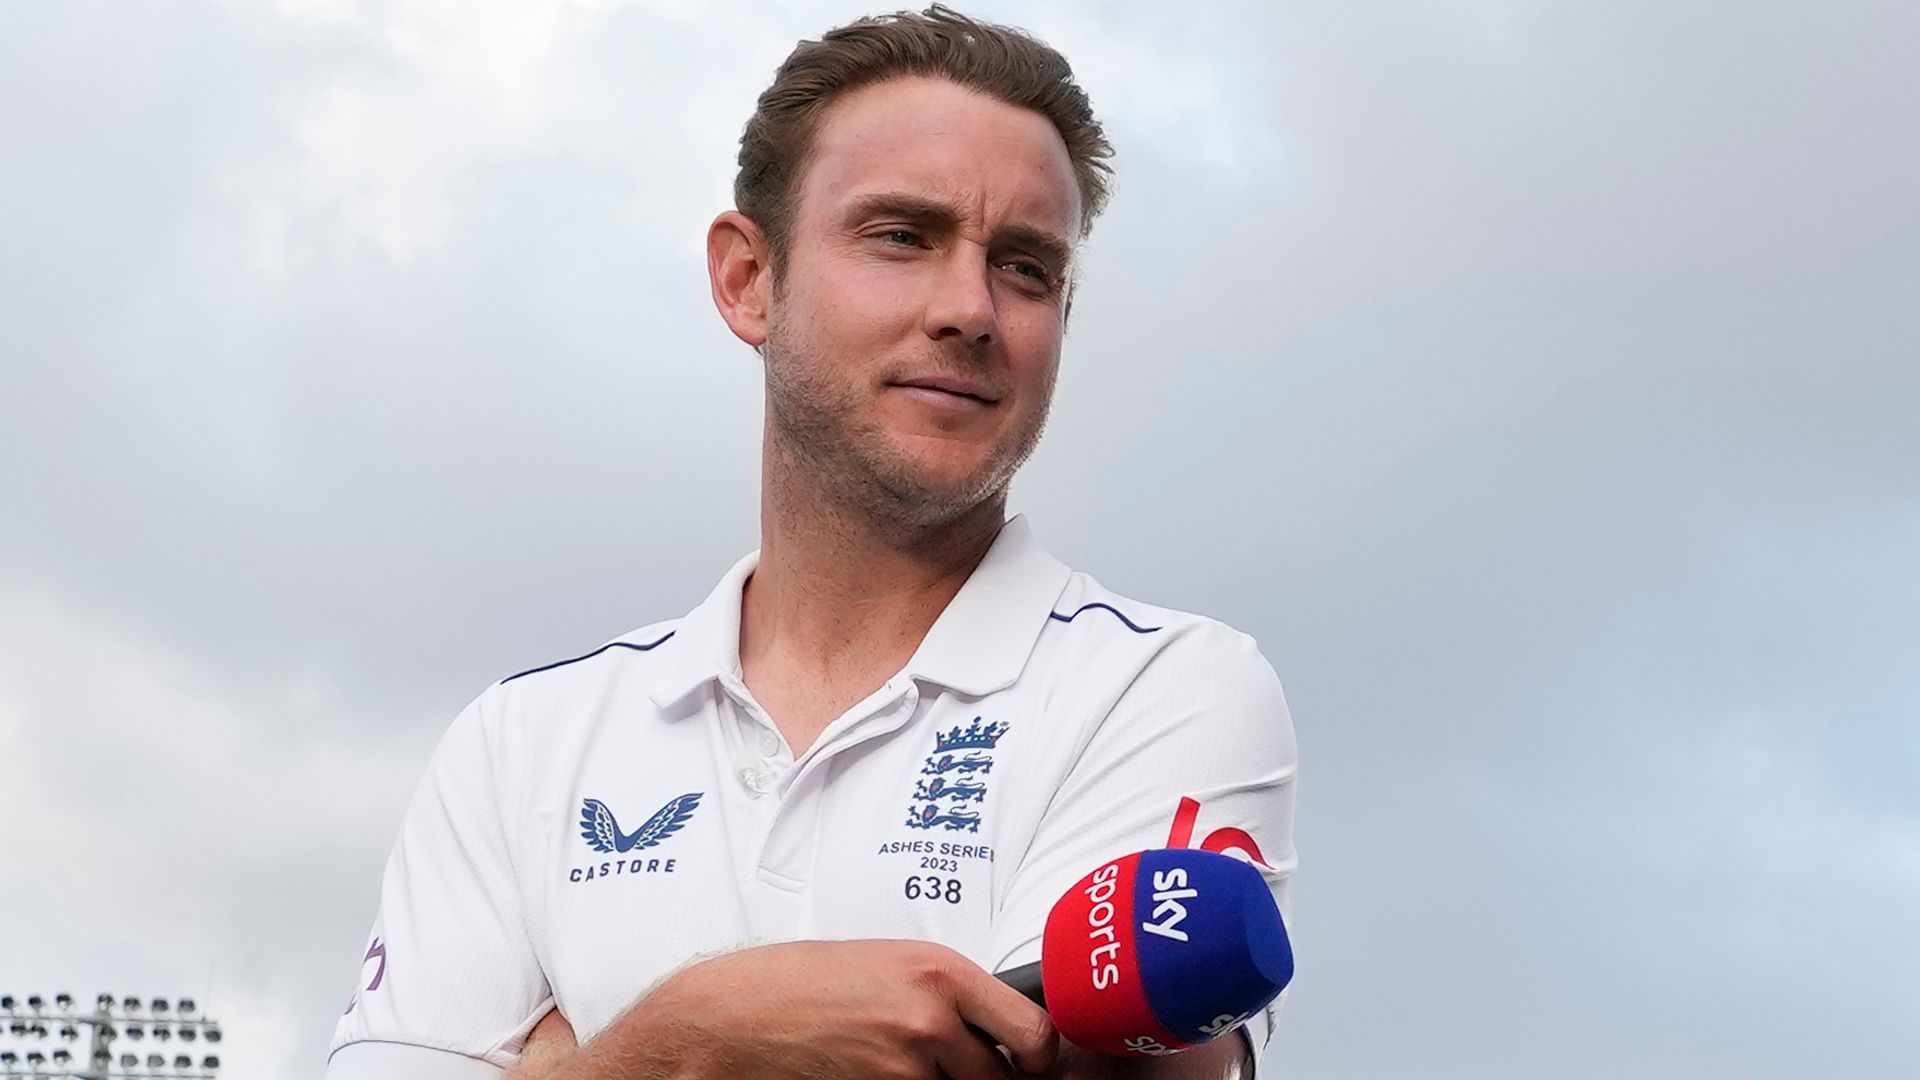 PODCAST: 'Australians will miss him' - Reaction as Broad retires